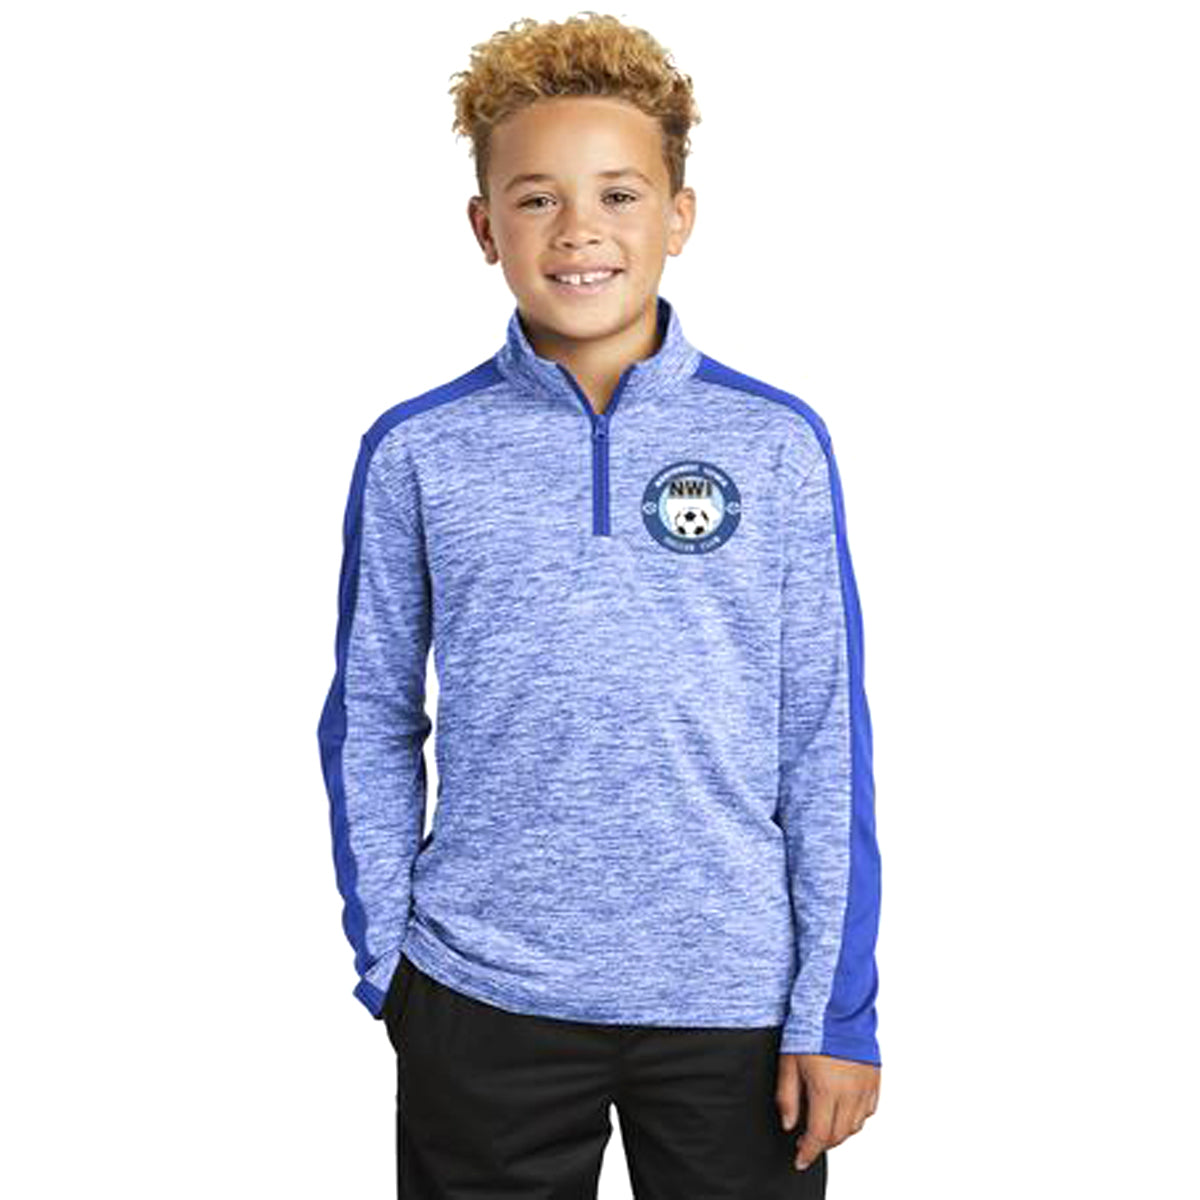 NWISC Galaxy Youth Sport-Tek Electric Colorblock 1/4 Zip Apparel Goal Kick Soccer Youth XS (6-8) 